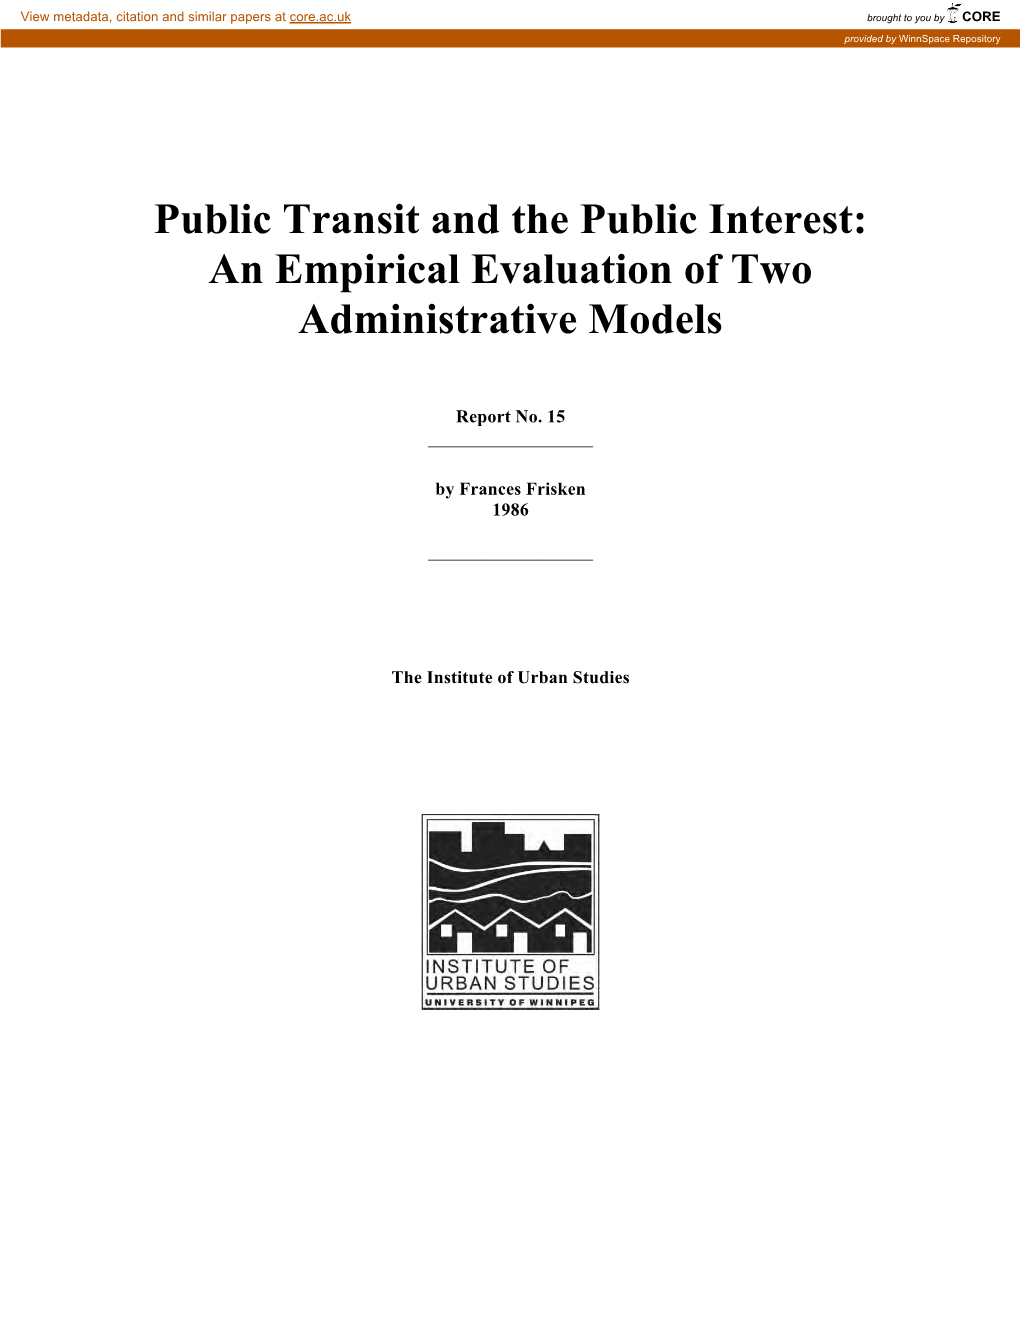 Public Transit and the Public Interest : an Empirical Evaluation of Two